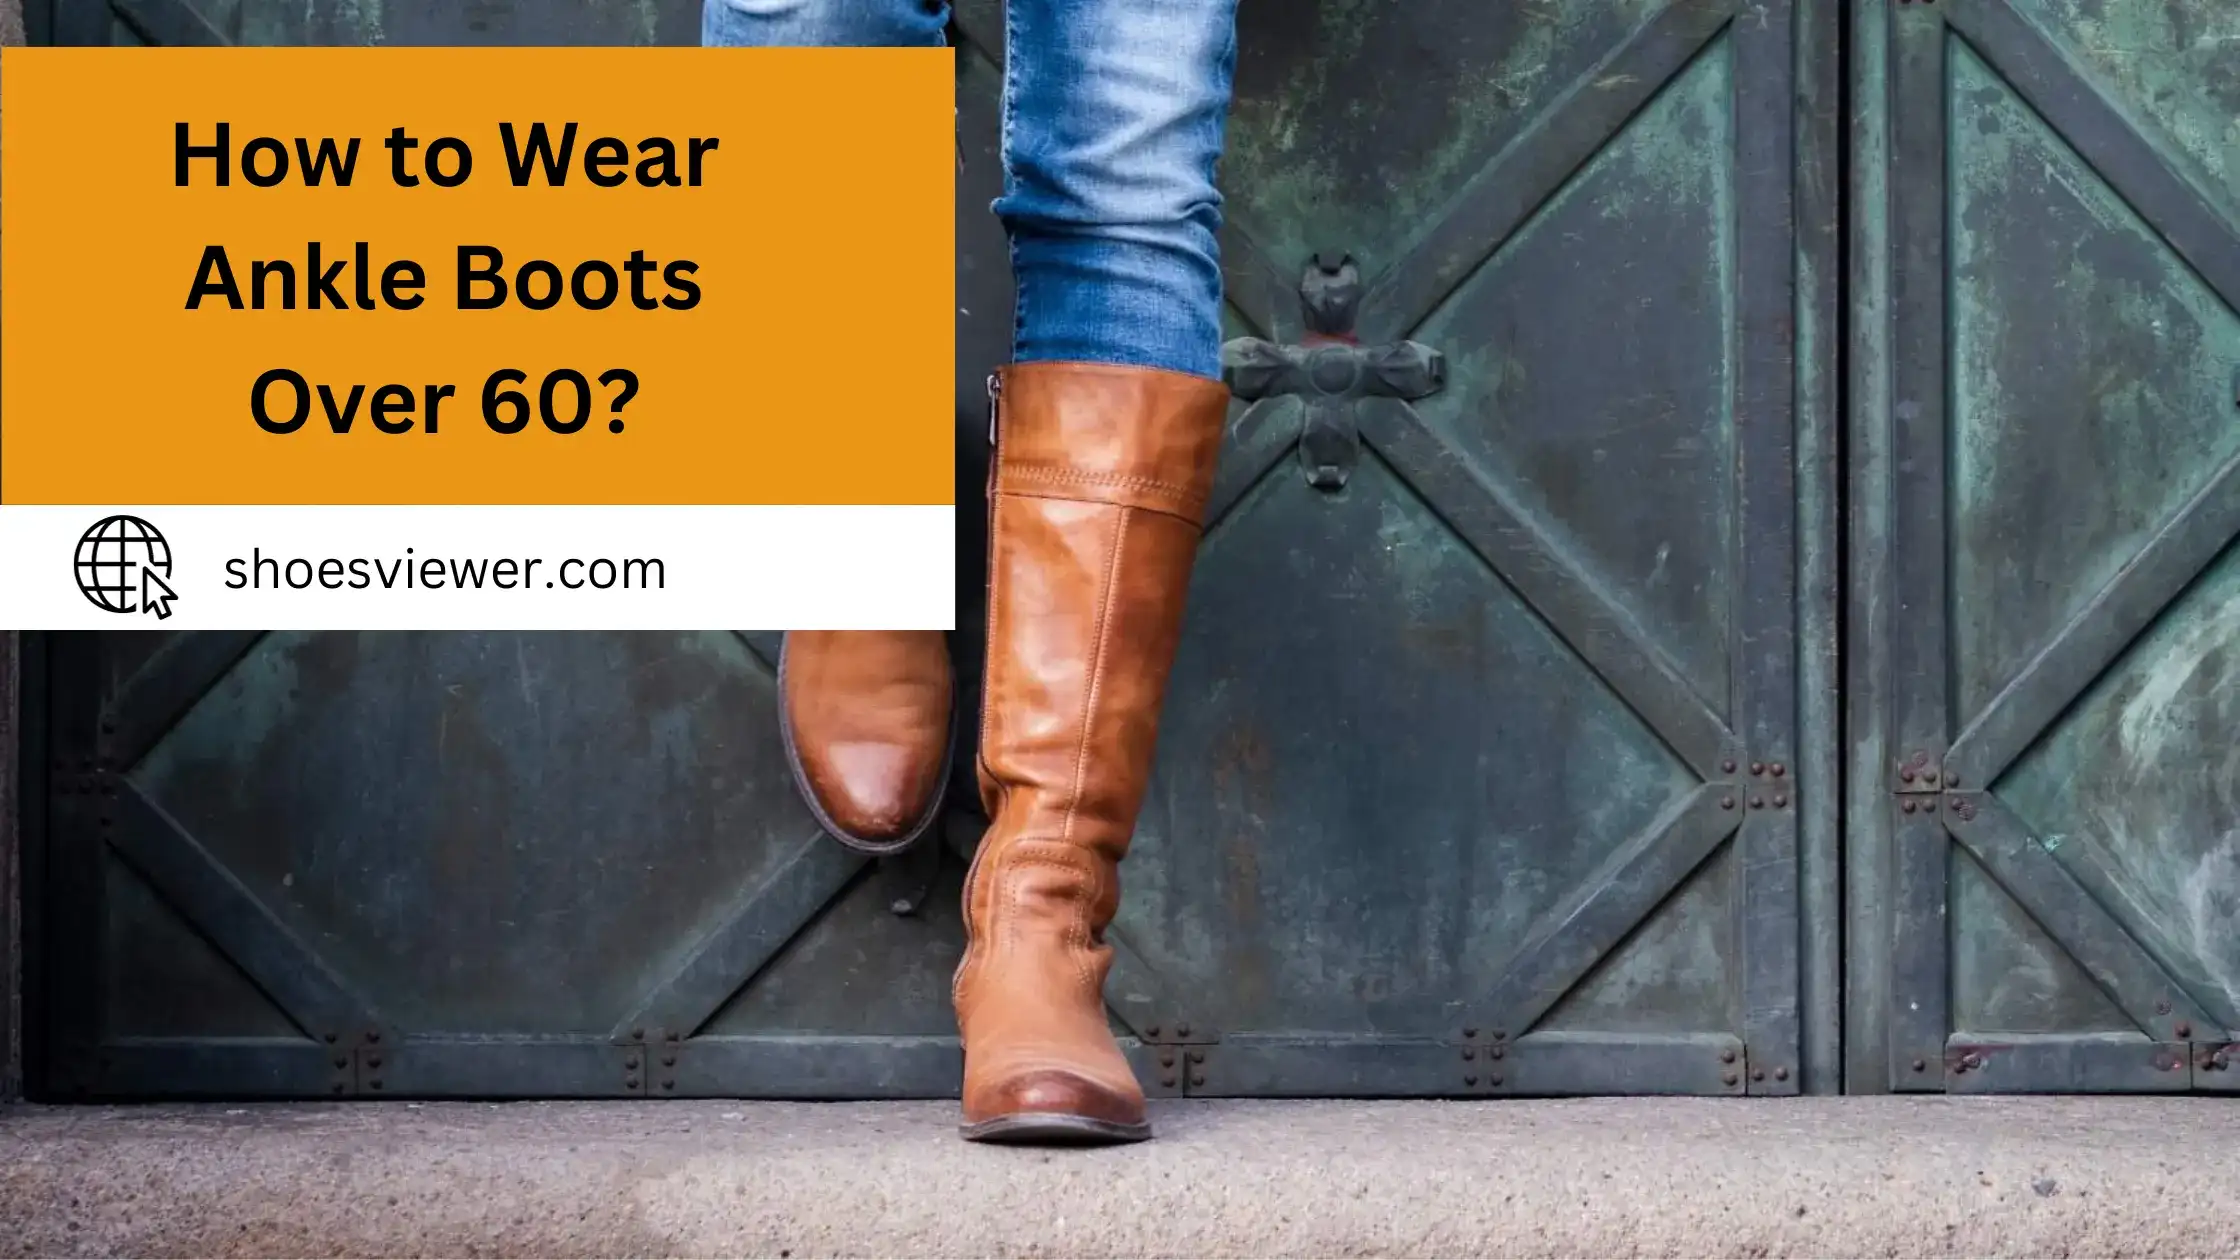 How to Wear Ankle Boots Over 60? You Should Need to Know